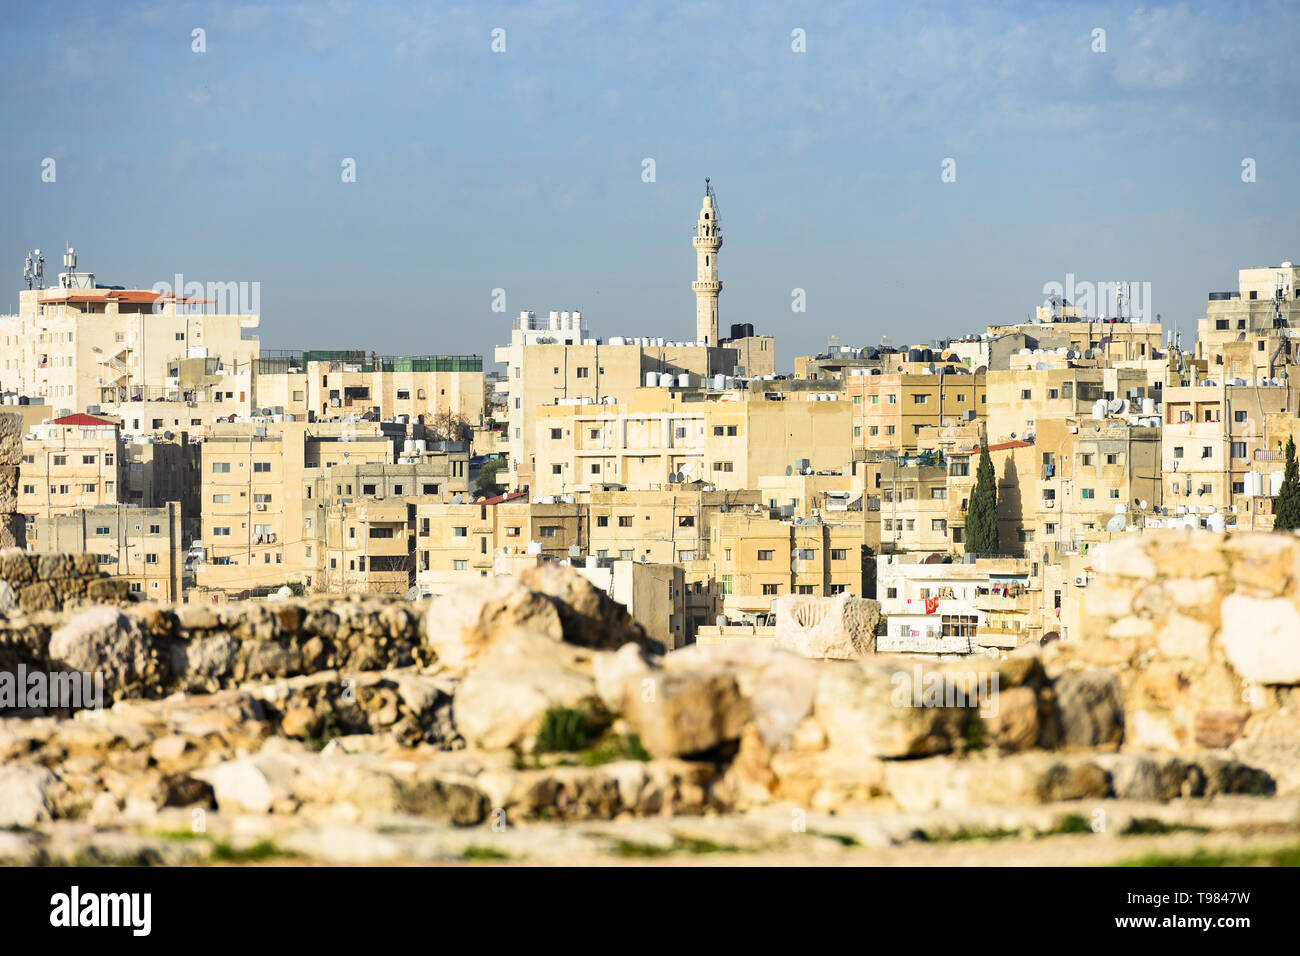 (Selective focus) Stunning view of the Amman skyline seen from the Amman Citadel in Jordan with a mosque in the distance. Stock Photo